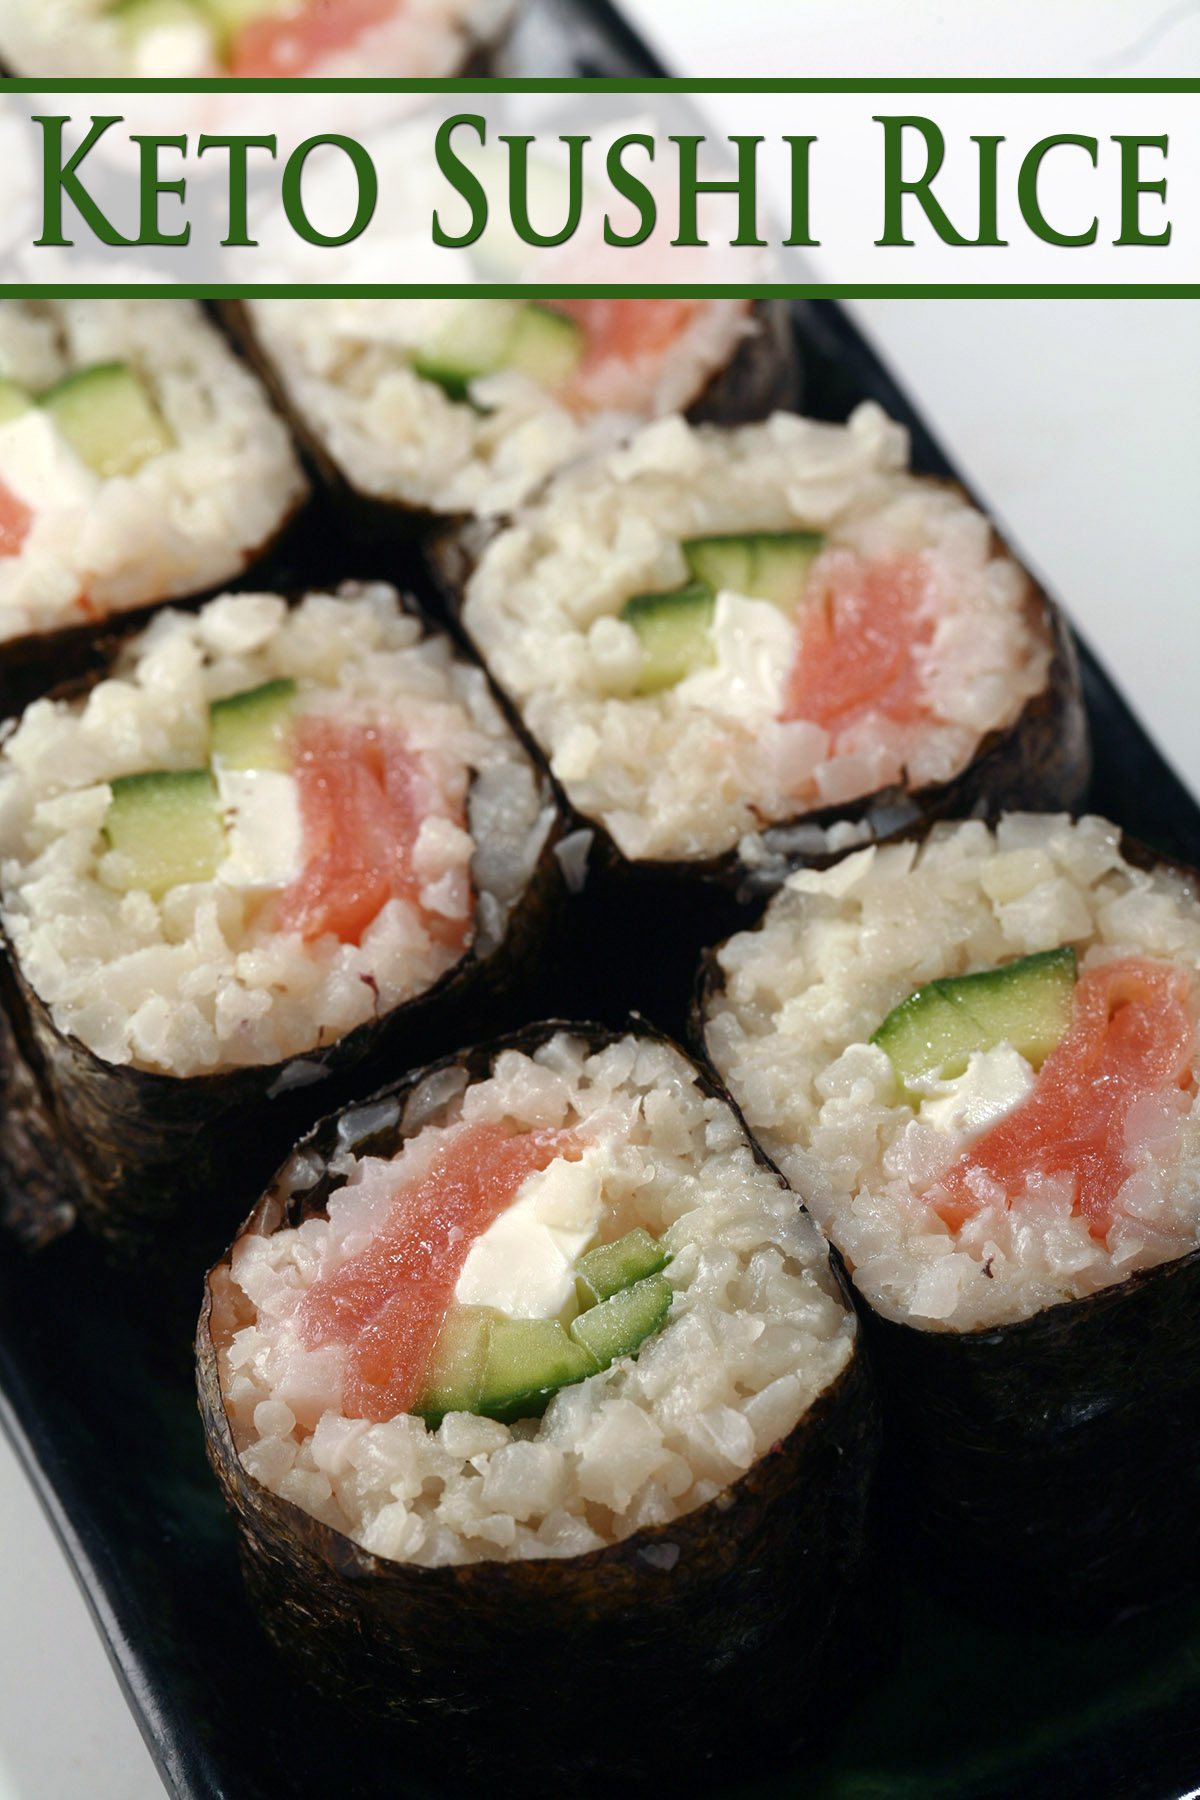 A close up view of a philly roll made from low carb sushi rice.